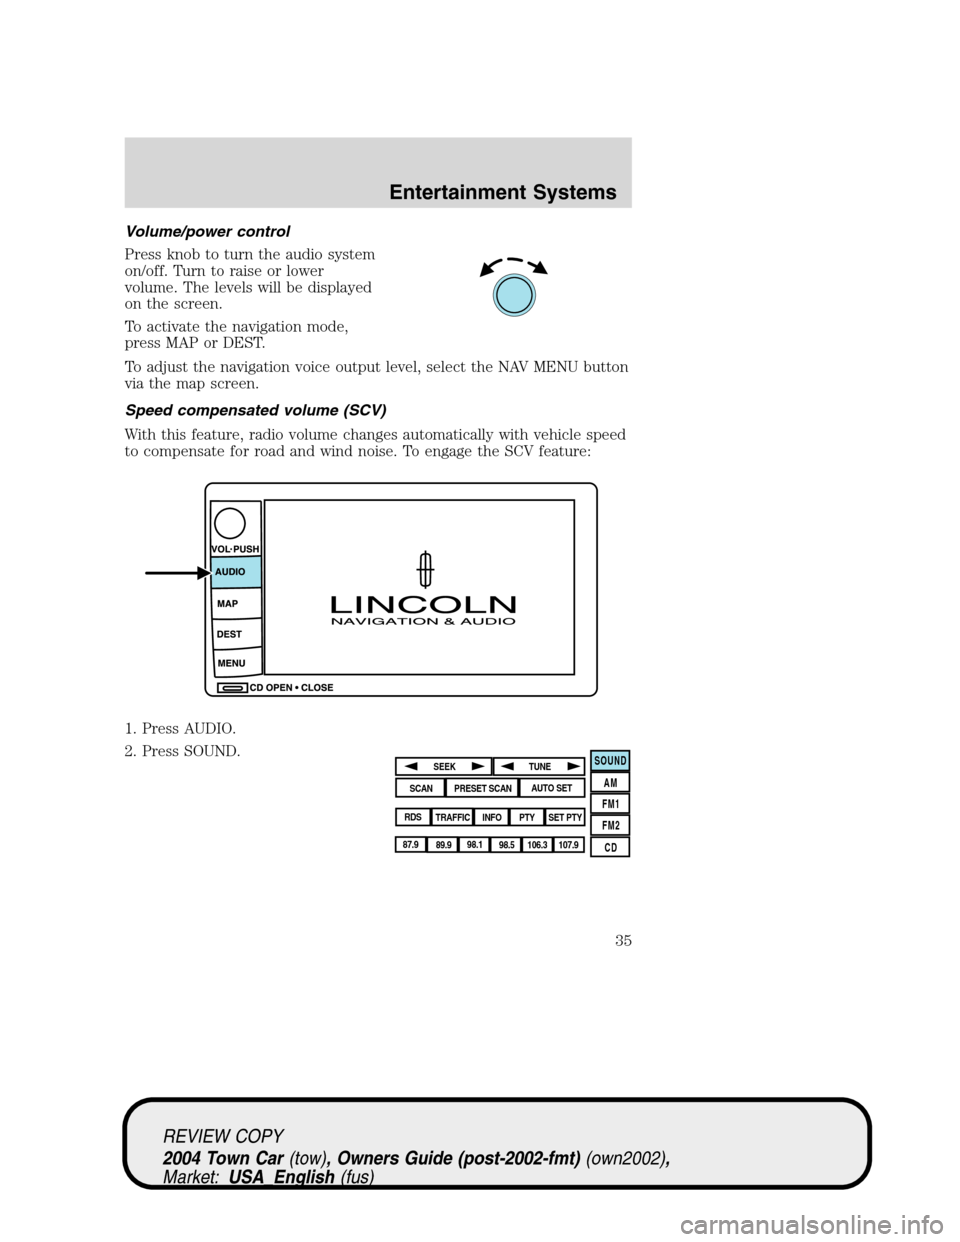 LINCOLN TOWN CAR 2004  Owners Manual Volume/power control
Press knob to turn the audio system
on/off. Turn to raise or lower
volume. The levels will be displayed
on the screen.
To activate the navigation mode,
press MAP or DEST.
To adjus